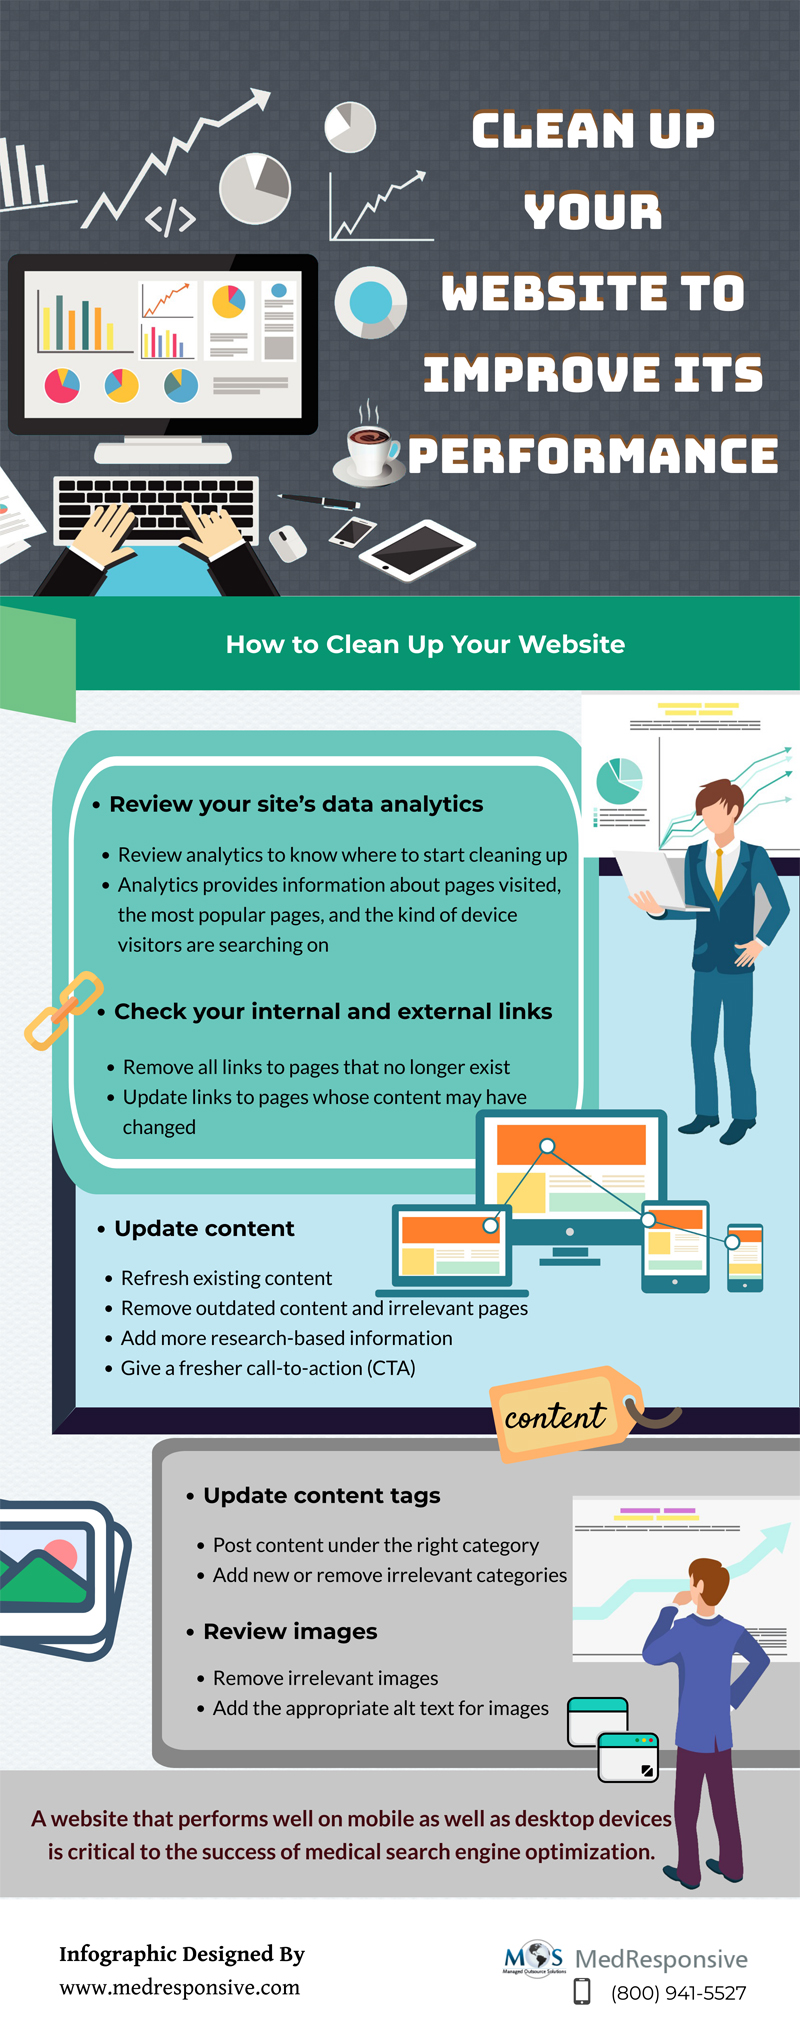 Clean Up Your Website